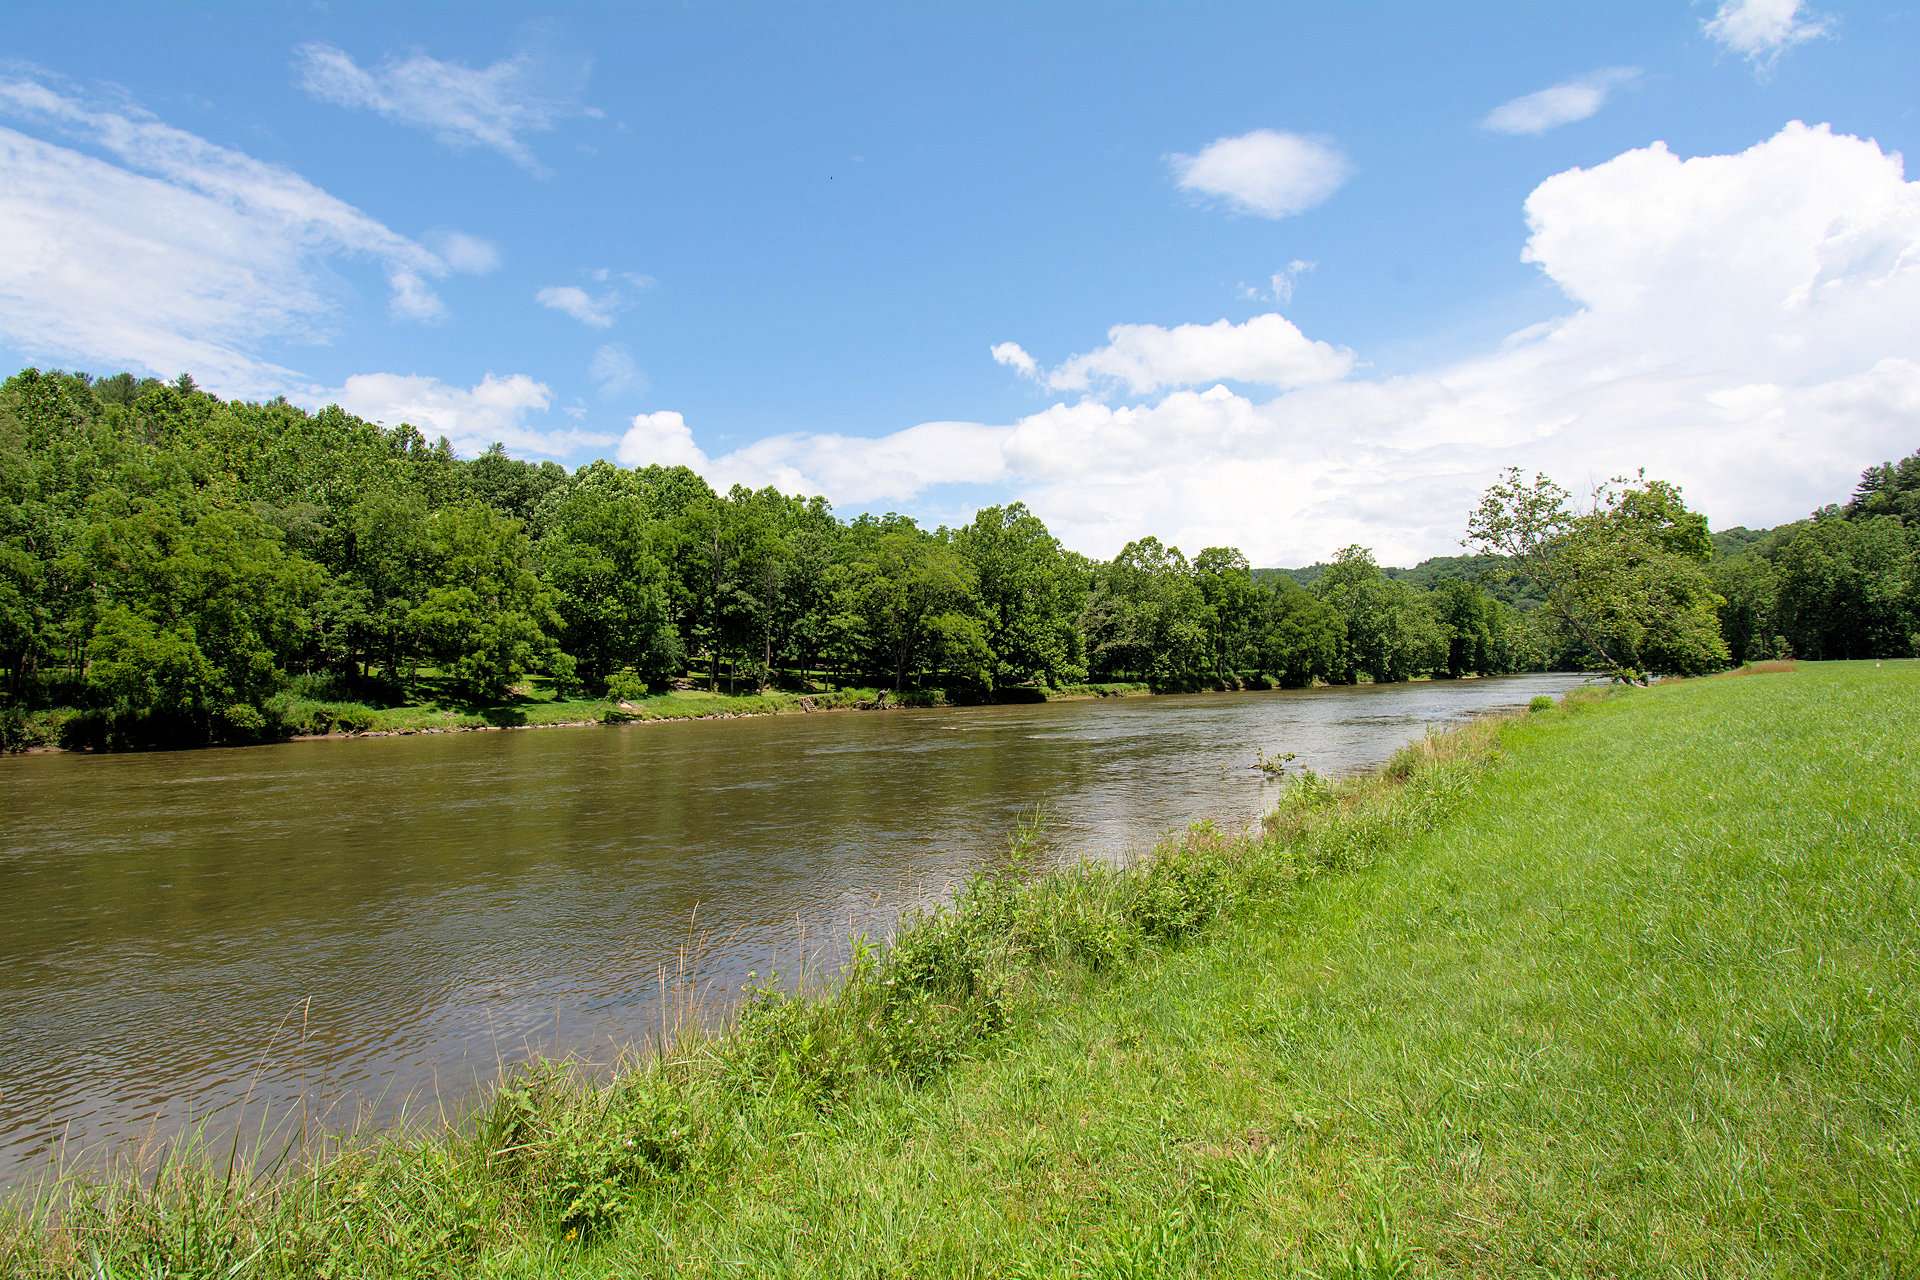 Enjoy all the NC High Country has to offer with your own river frontage for fishing, or access for canoes, kayaks, and tubes for floating the river.